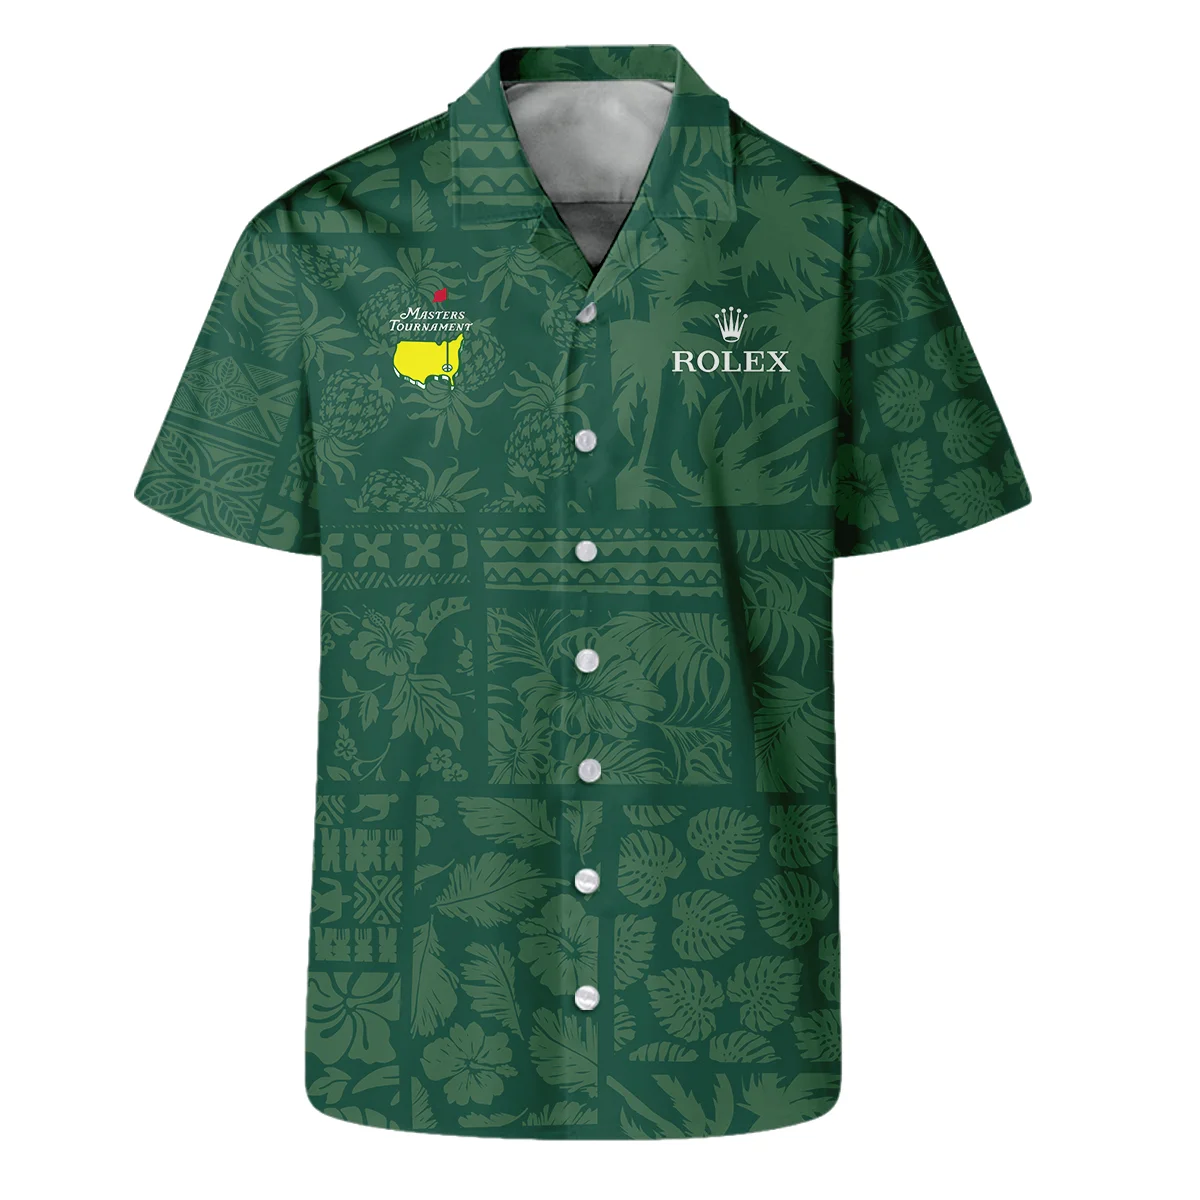 Masters Tournament Rolex Hawaiian Style Fabric Patchwork Long Polo Shirt Style Classic Long Polo Shirt For Men